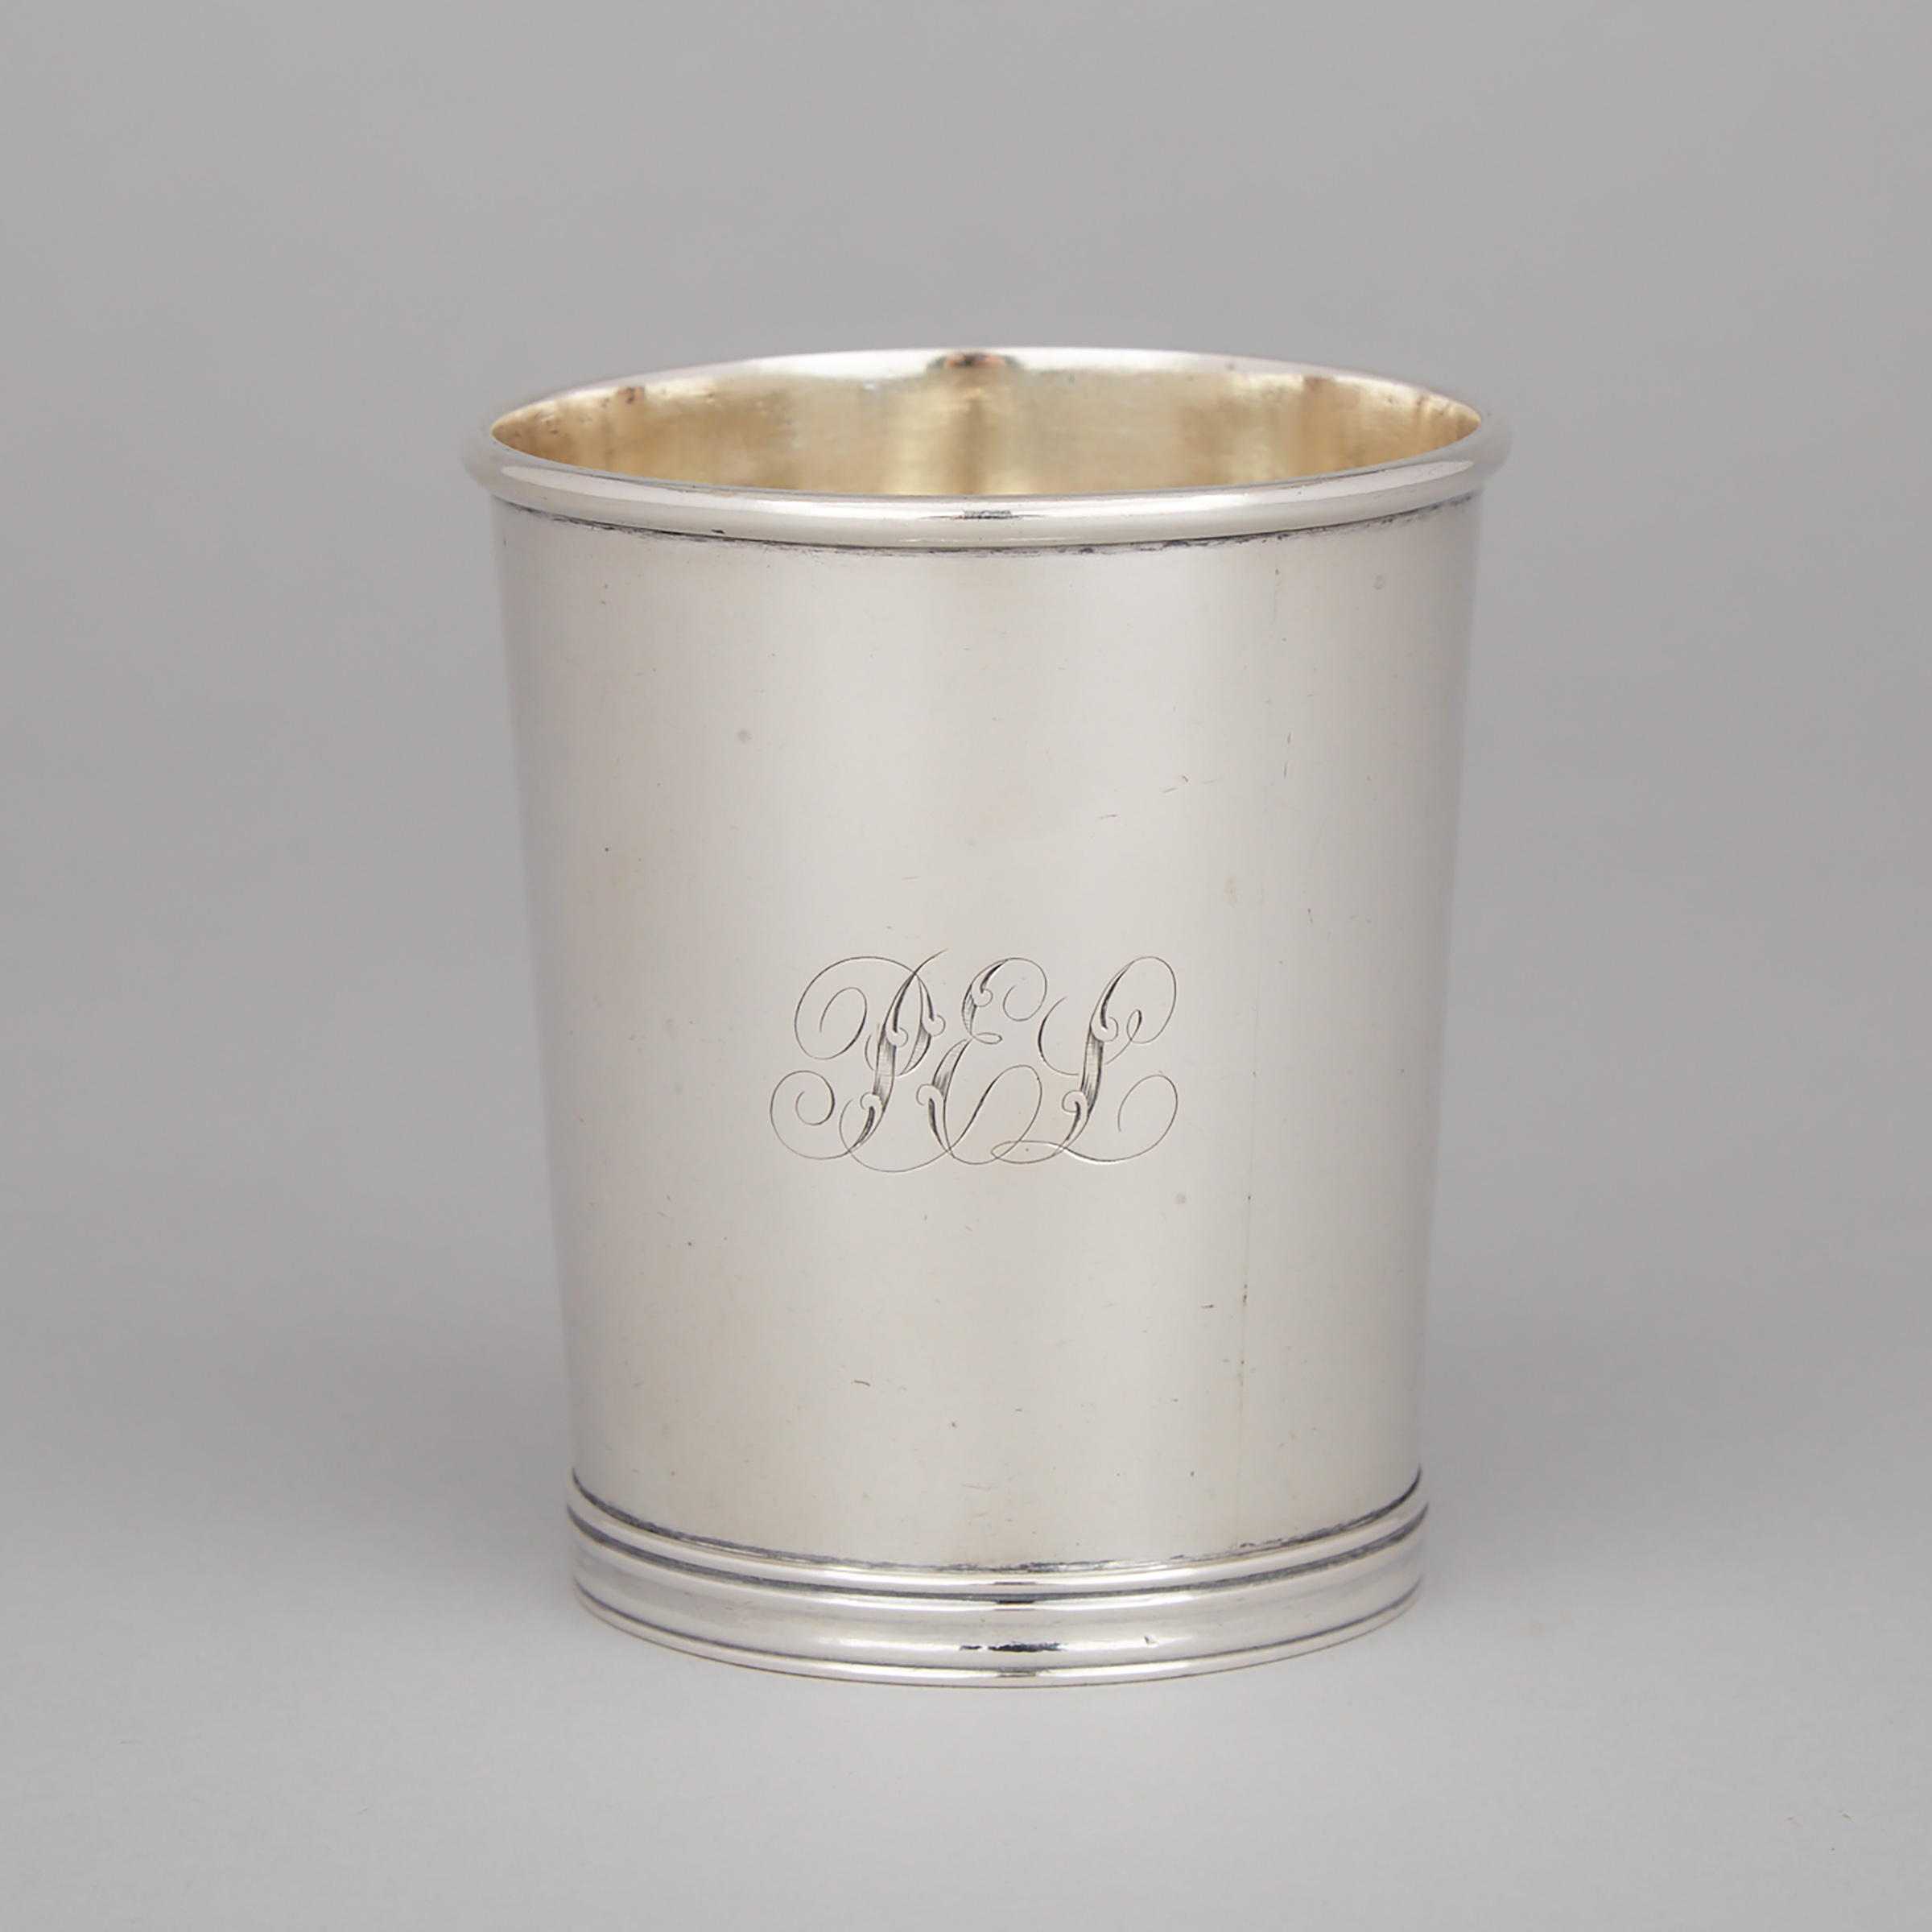 Canadian Silver Beaker, George Savage & Son, Montreal, Que., c.1829-43